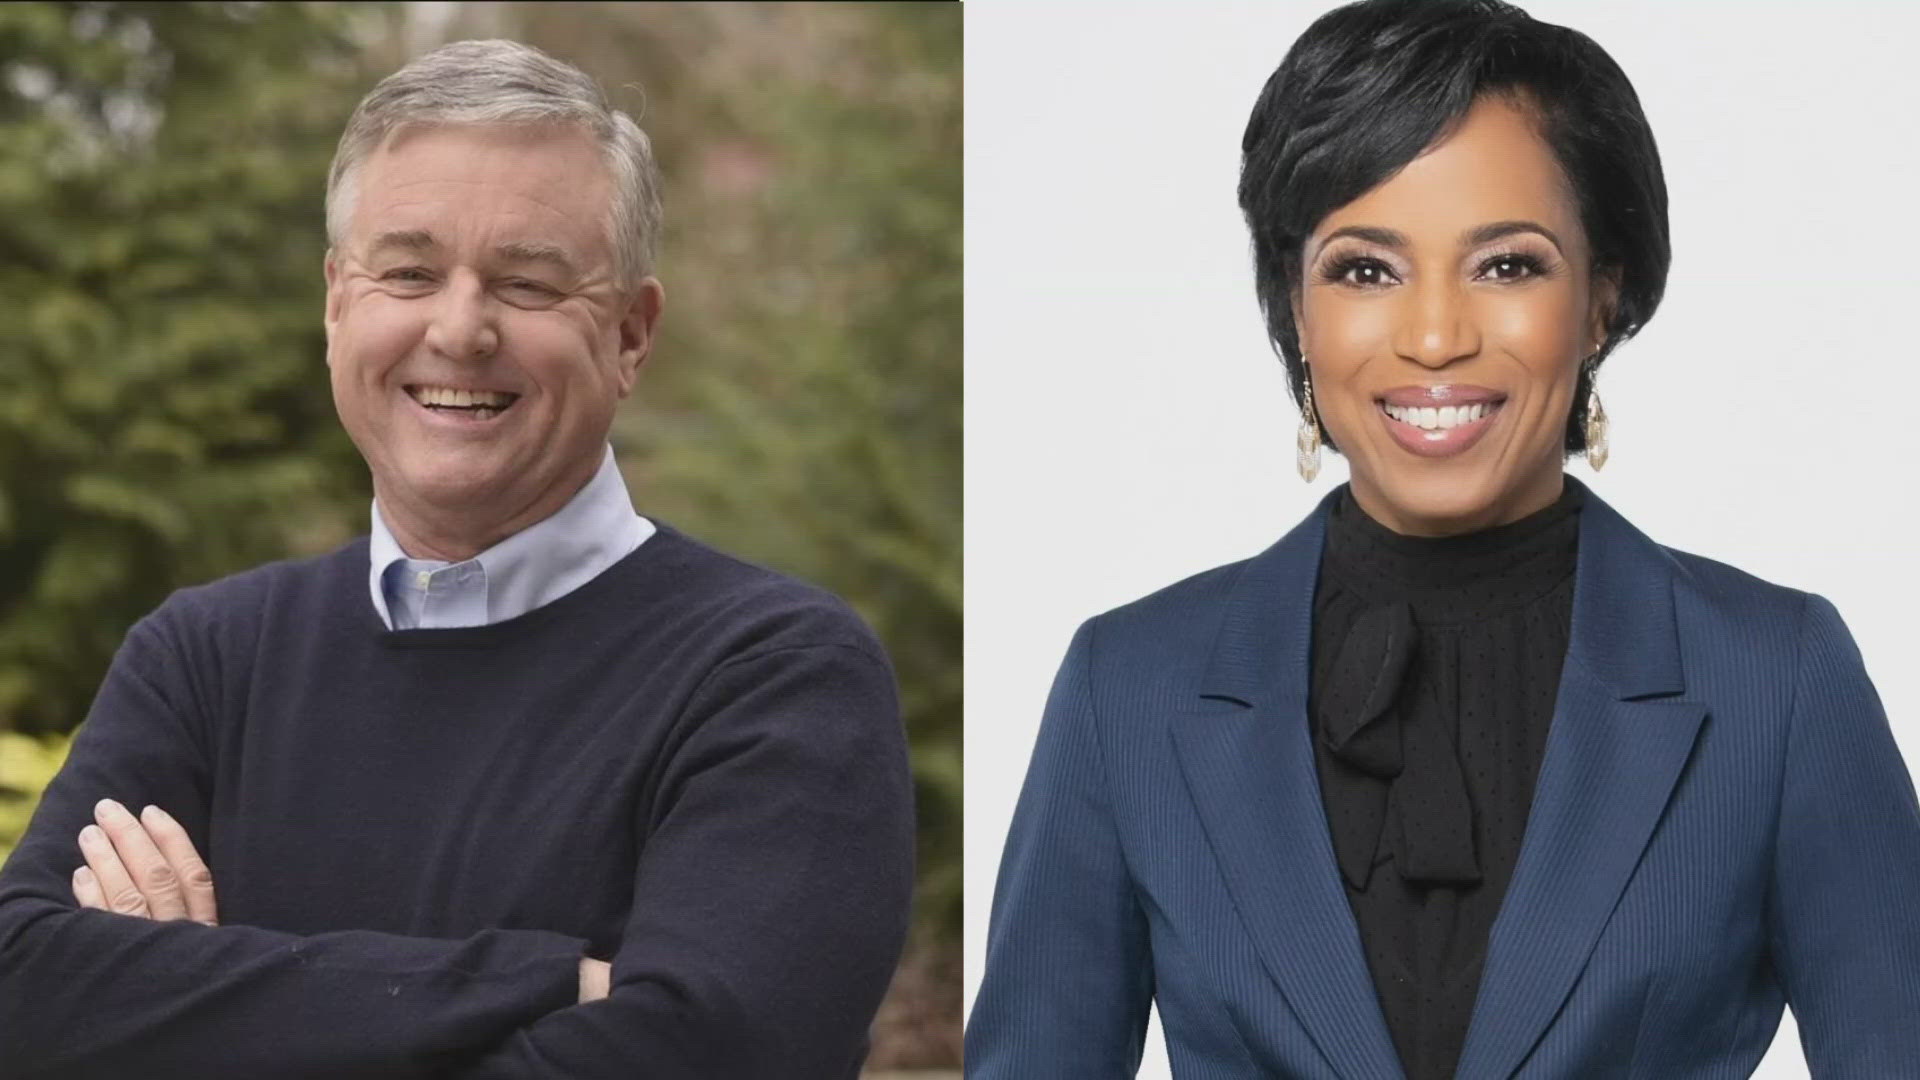 As the race for the Senate intensifies, money increases too. Here's how the numbers are going for Rep. David Trone (D-MD 6th District) and candidate Angela Brooks.